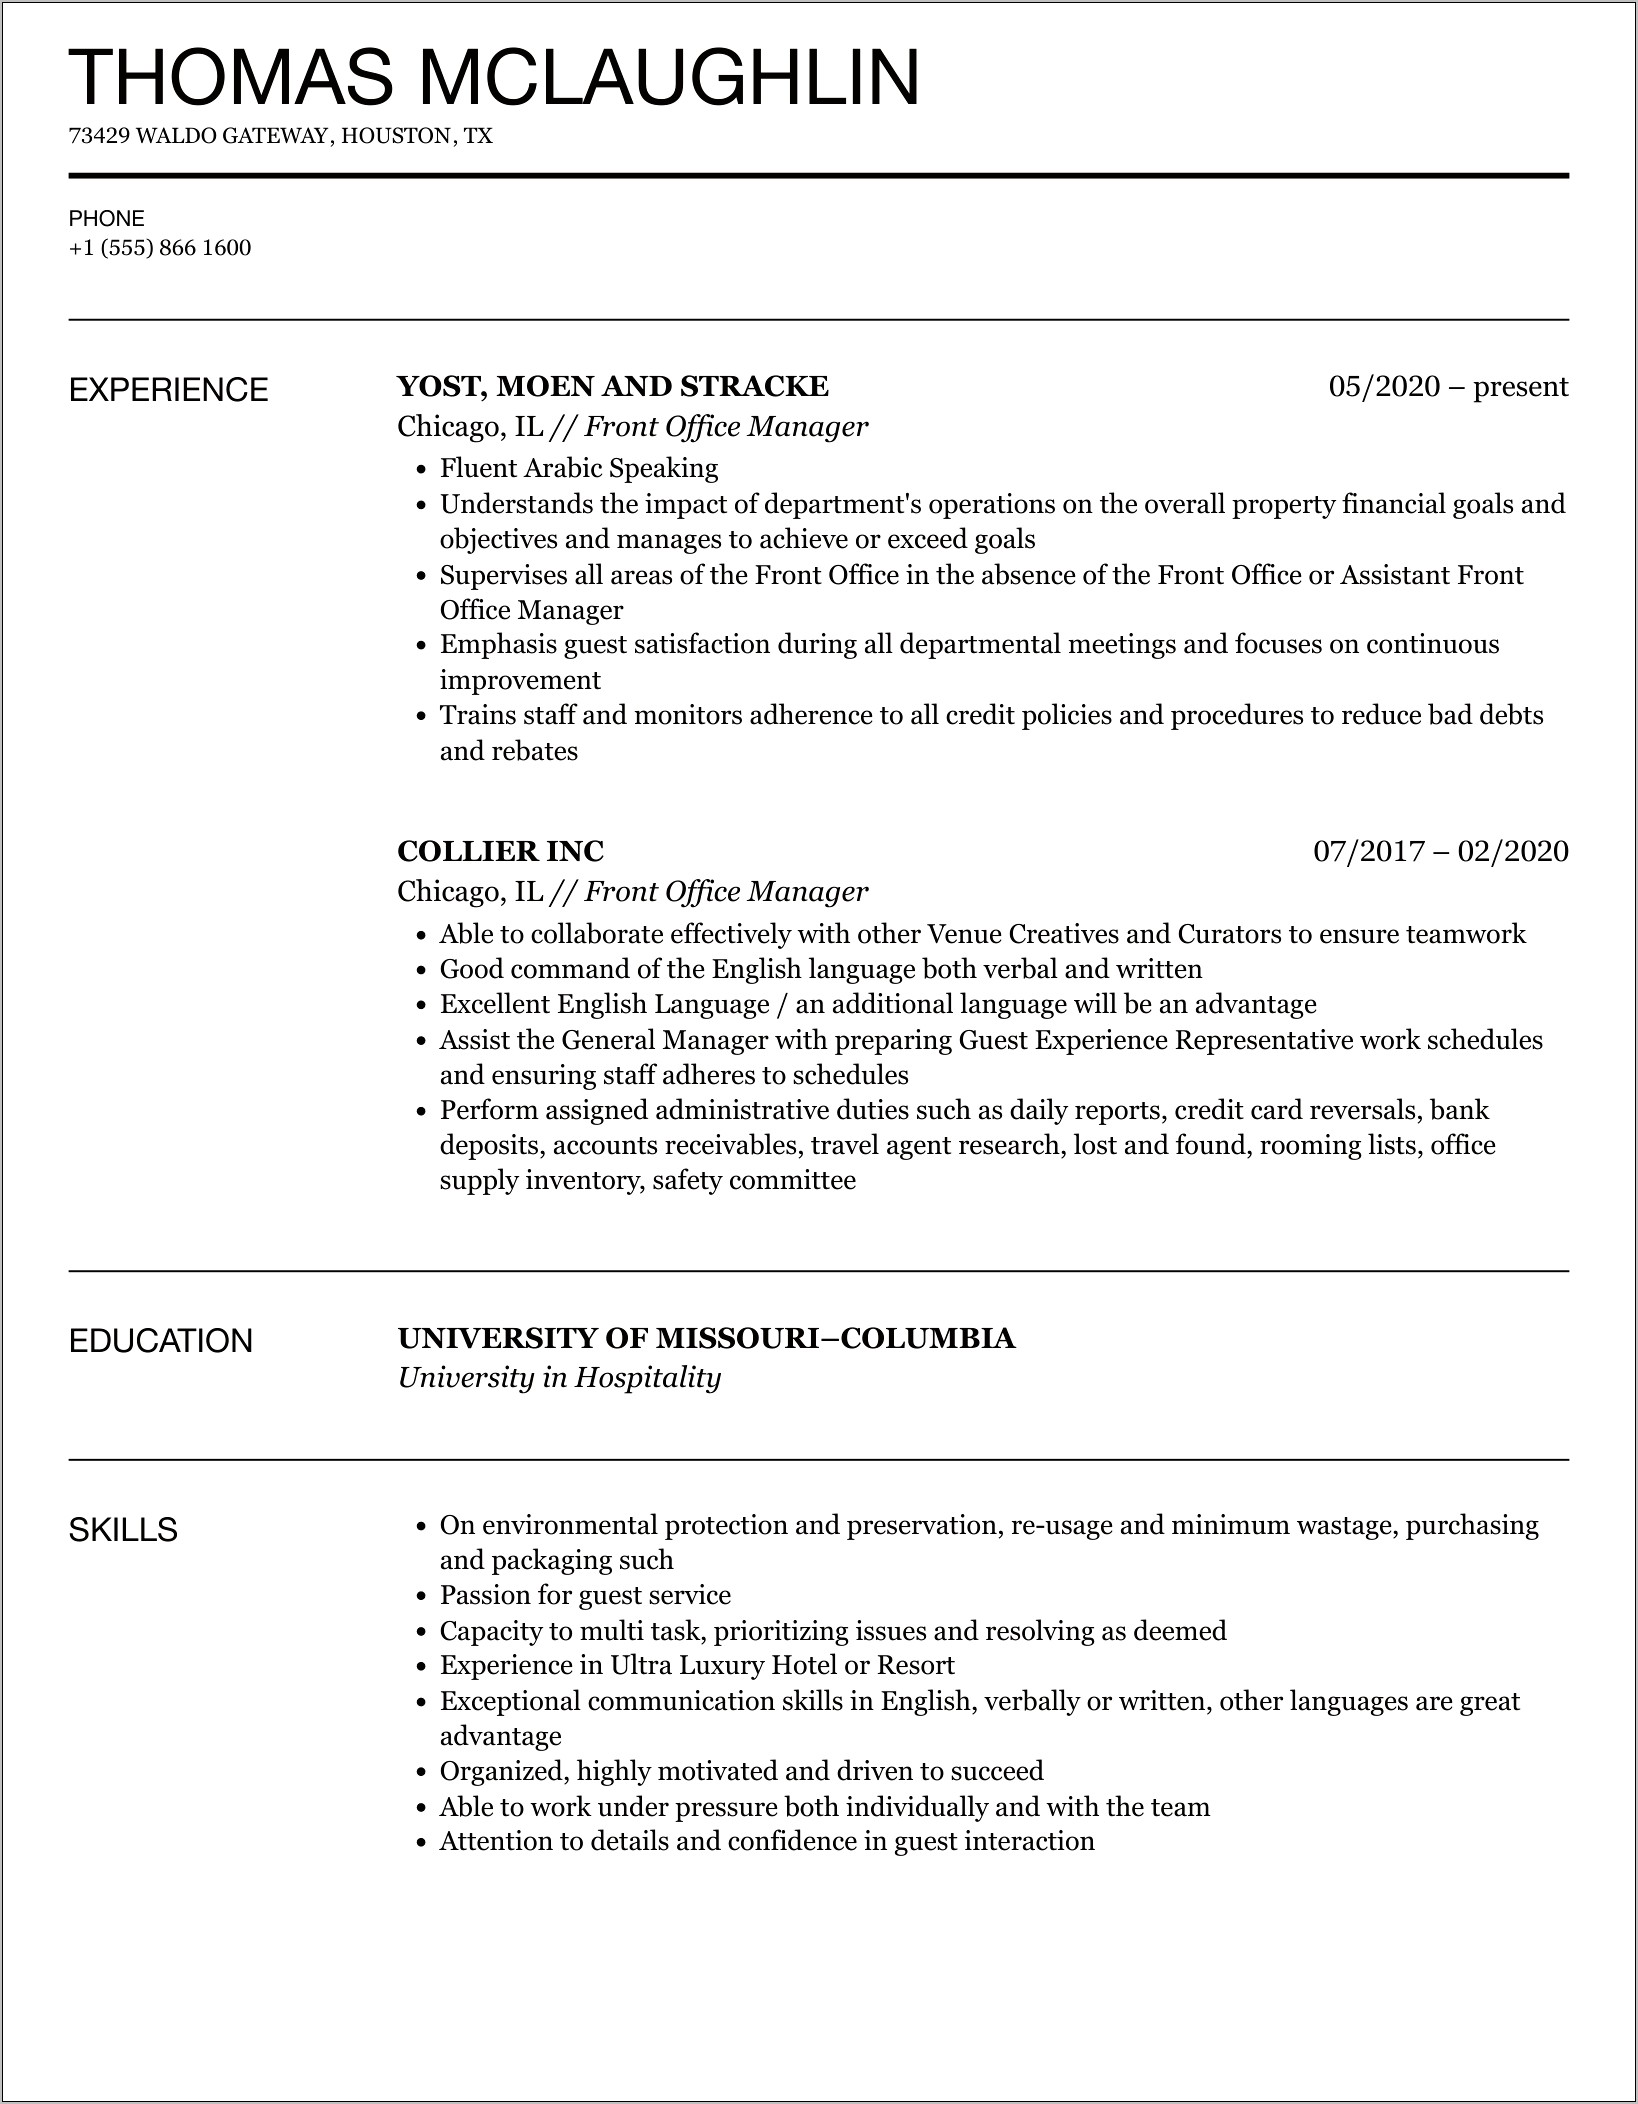 Resume For Guest Services Manager